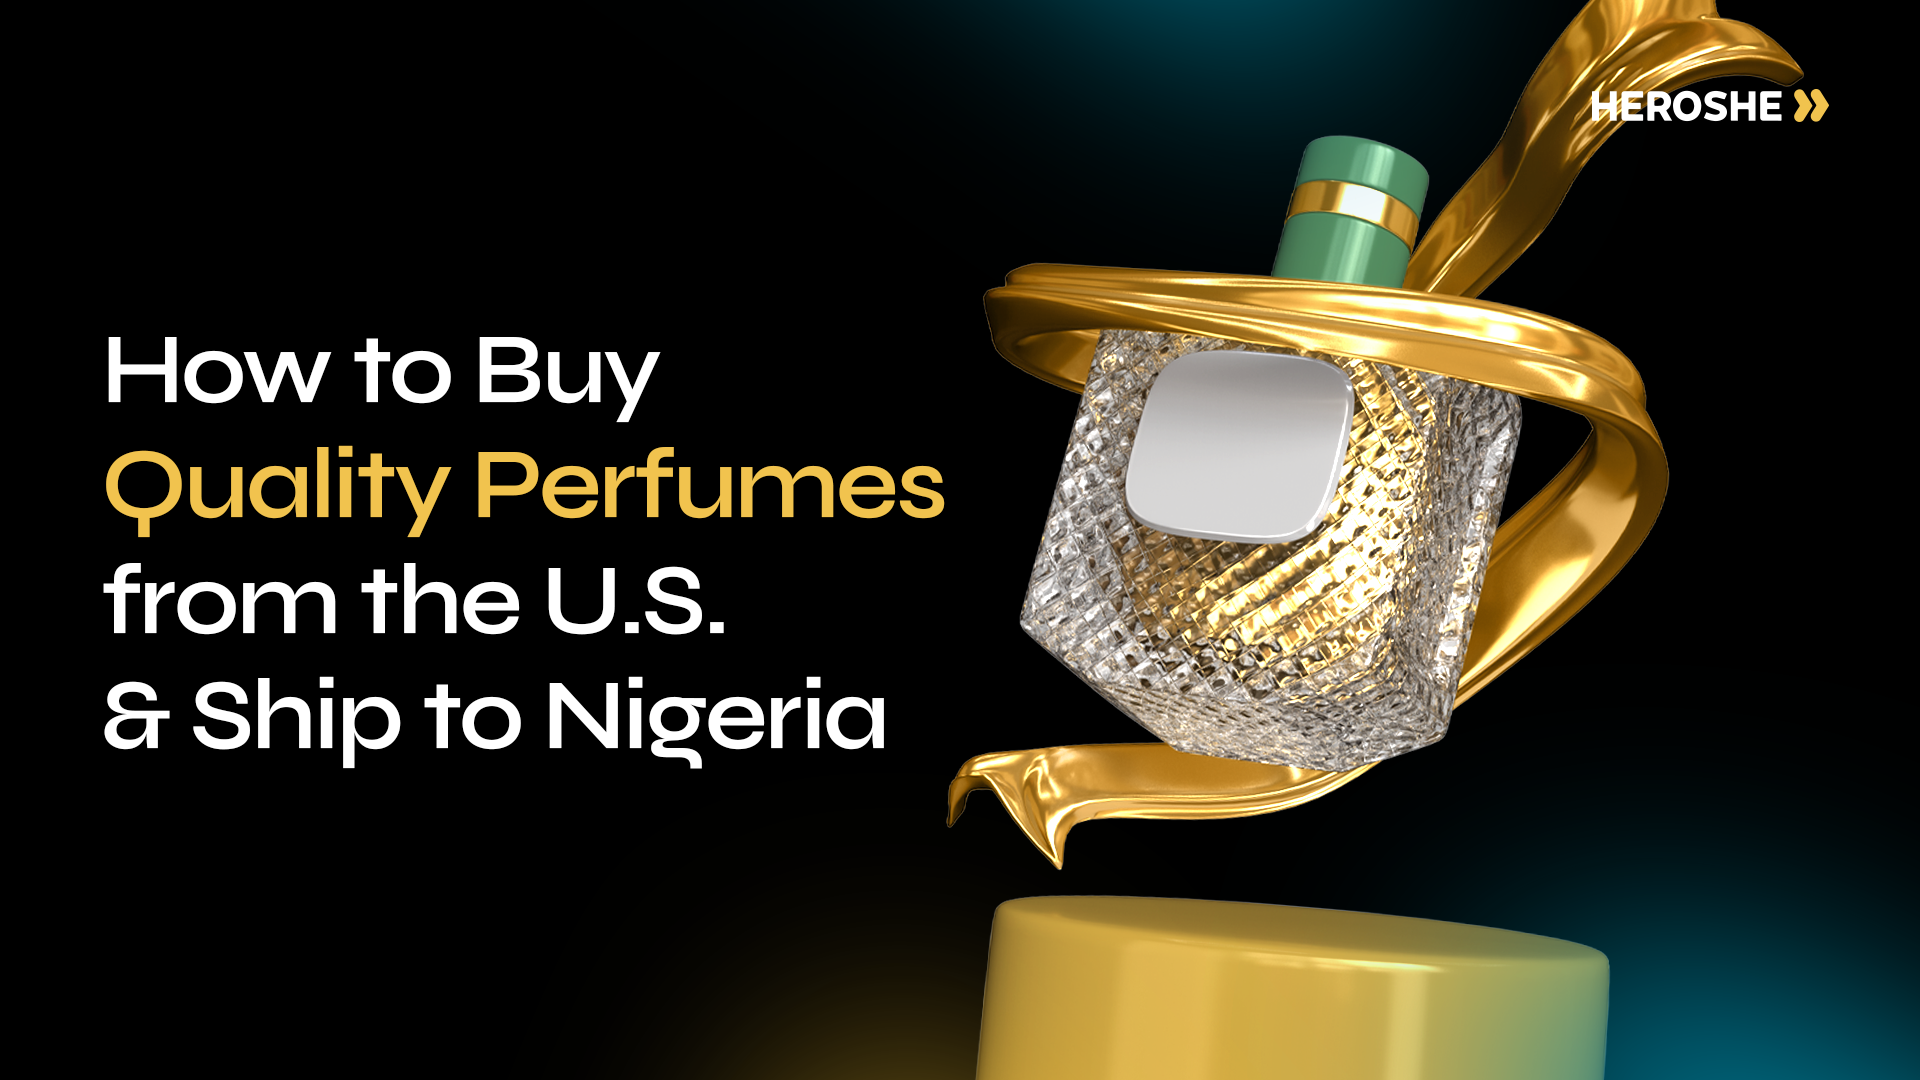 How To Buy Quality Perfumes From The U.S. & Ship To Nigeria